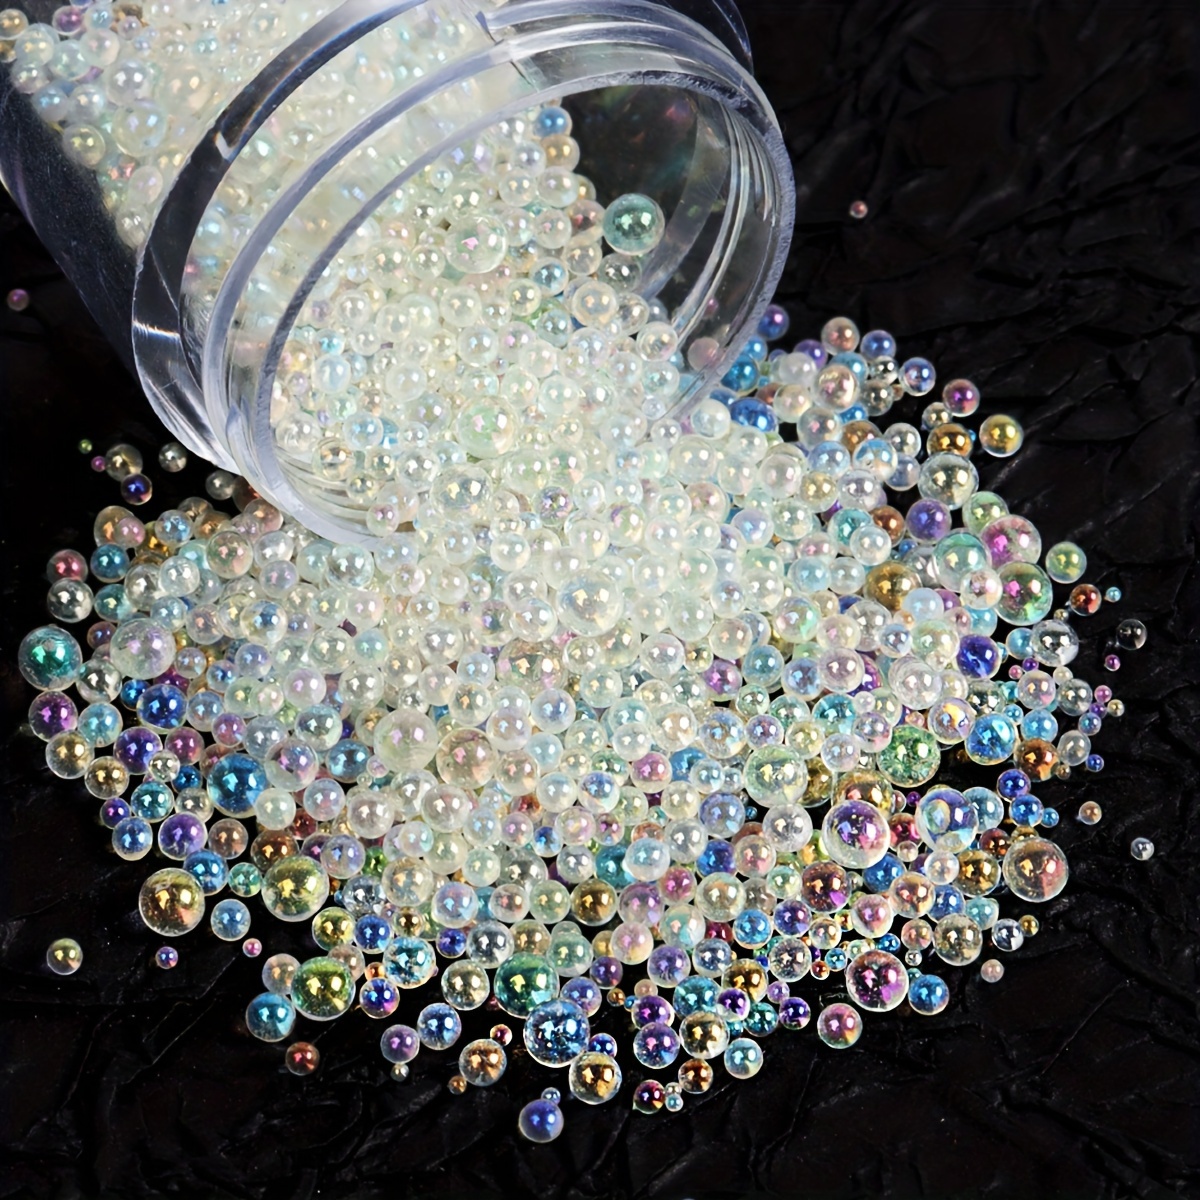 

16g/bottle Aurora Glass Beads Epoxy Uv Resin Filler, 0.4-3mm Mini Bubble Beads For Diy Resin Molds Silicone Jewelry Making Supplies Accessories Decoration